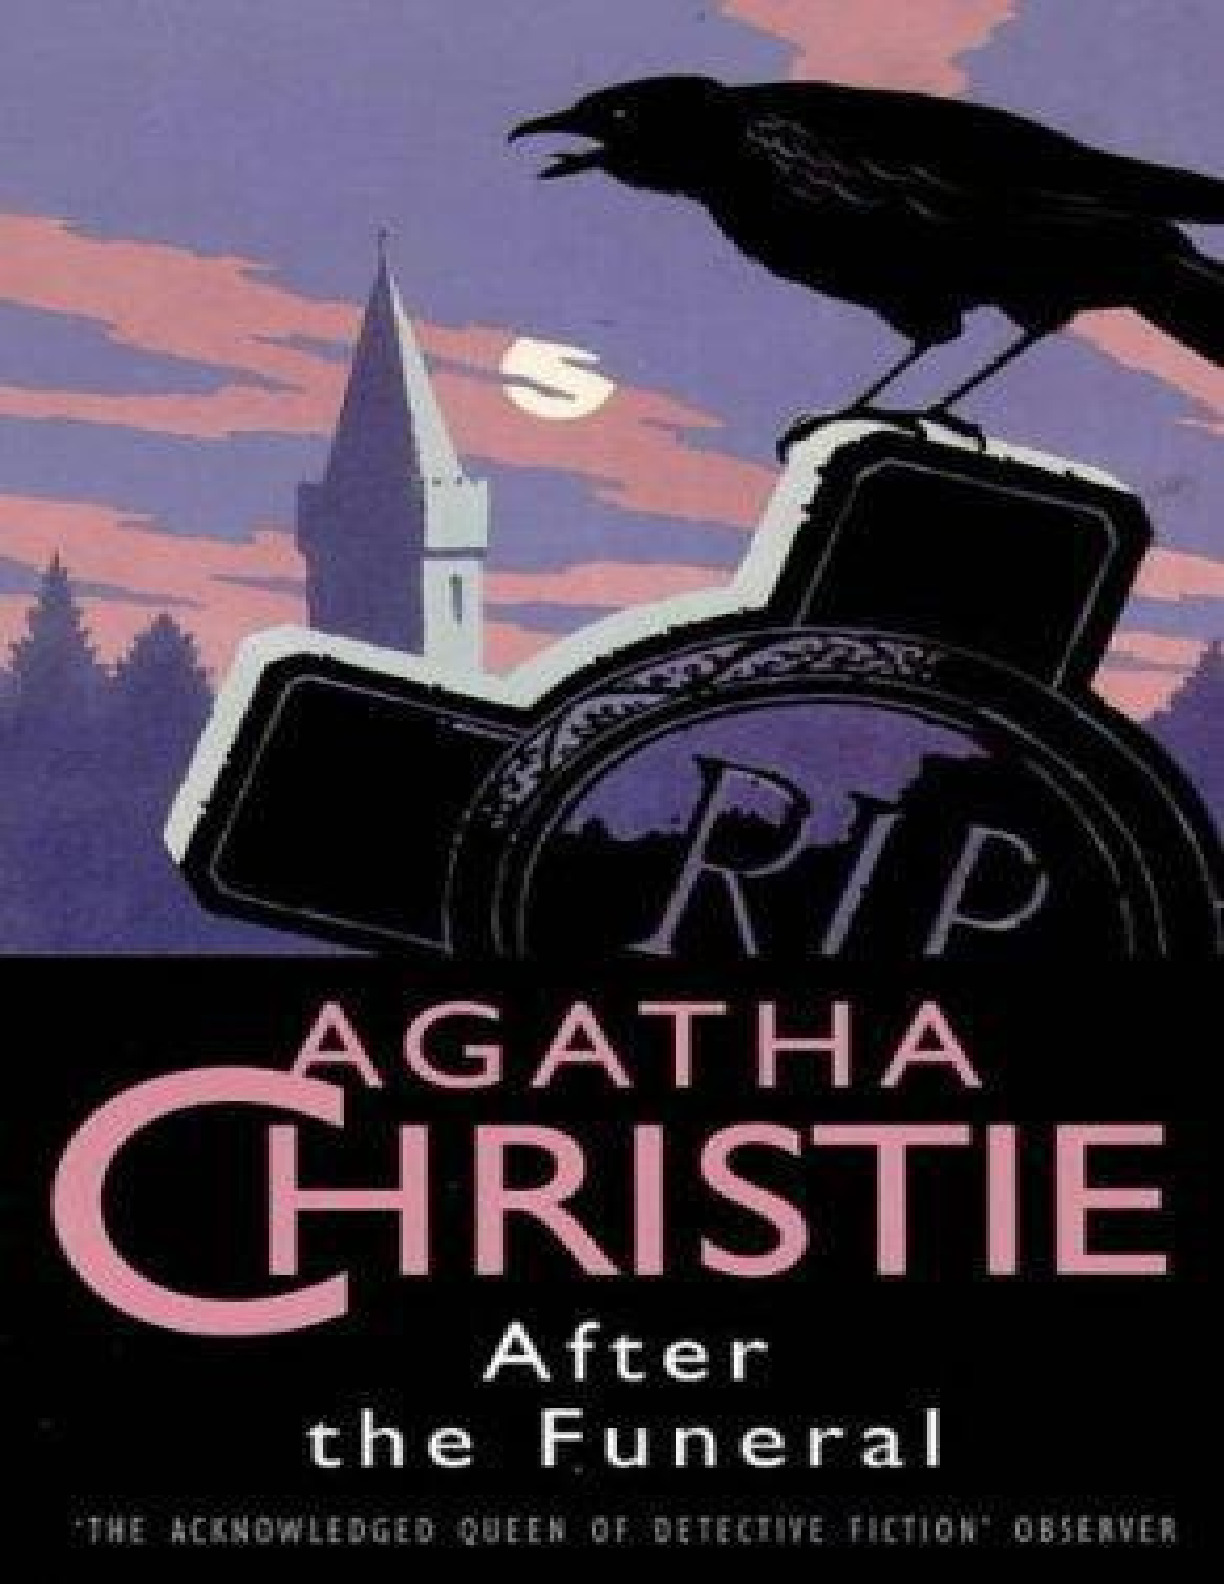 After the funeral – Agatha Christie